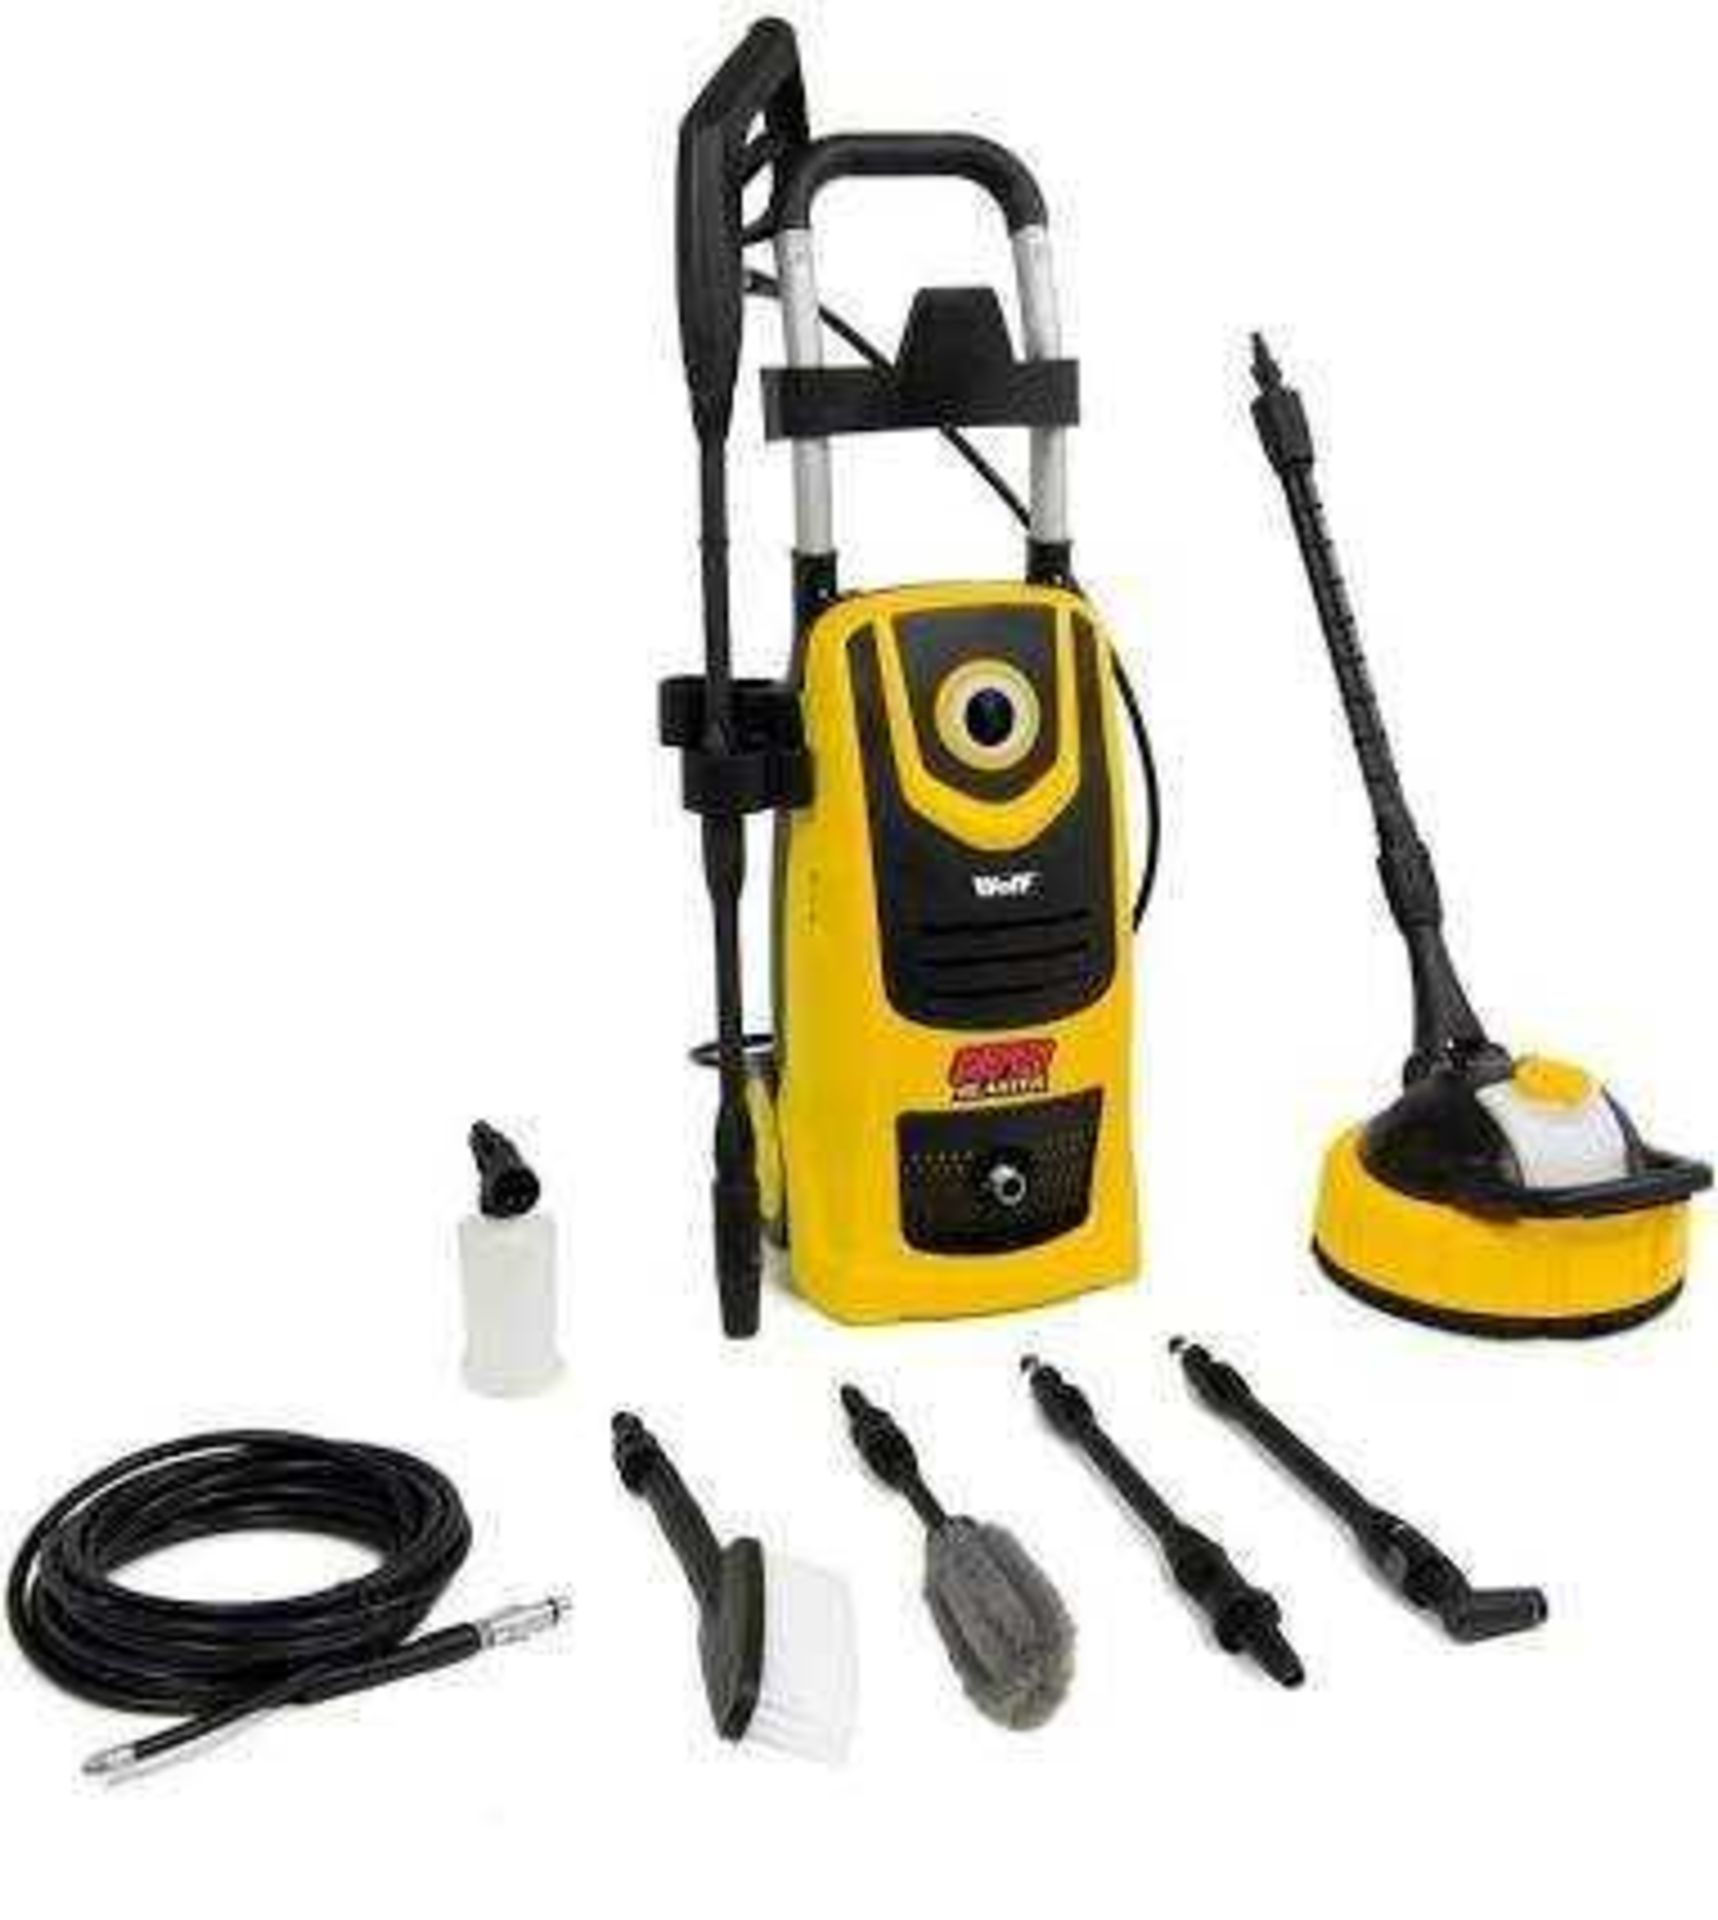 RRP £190 Boxed Brand New Factory Sealed Wolf 140 Bar Super Blaster Pressure Washer With Outdoor & Ca